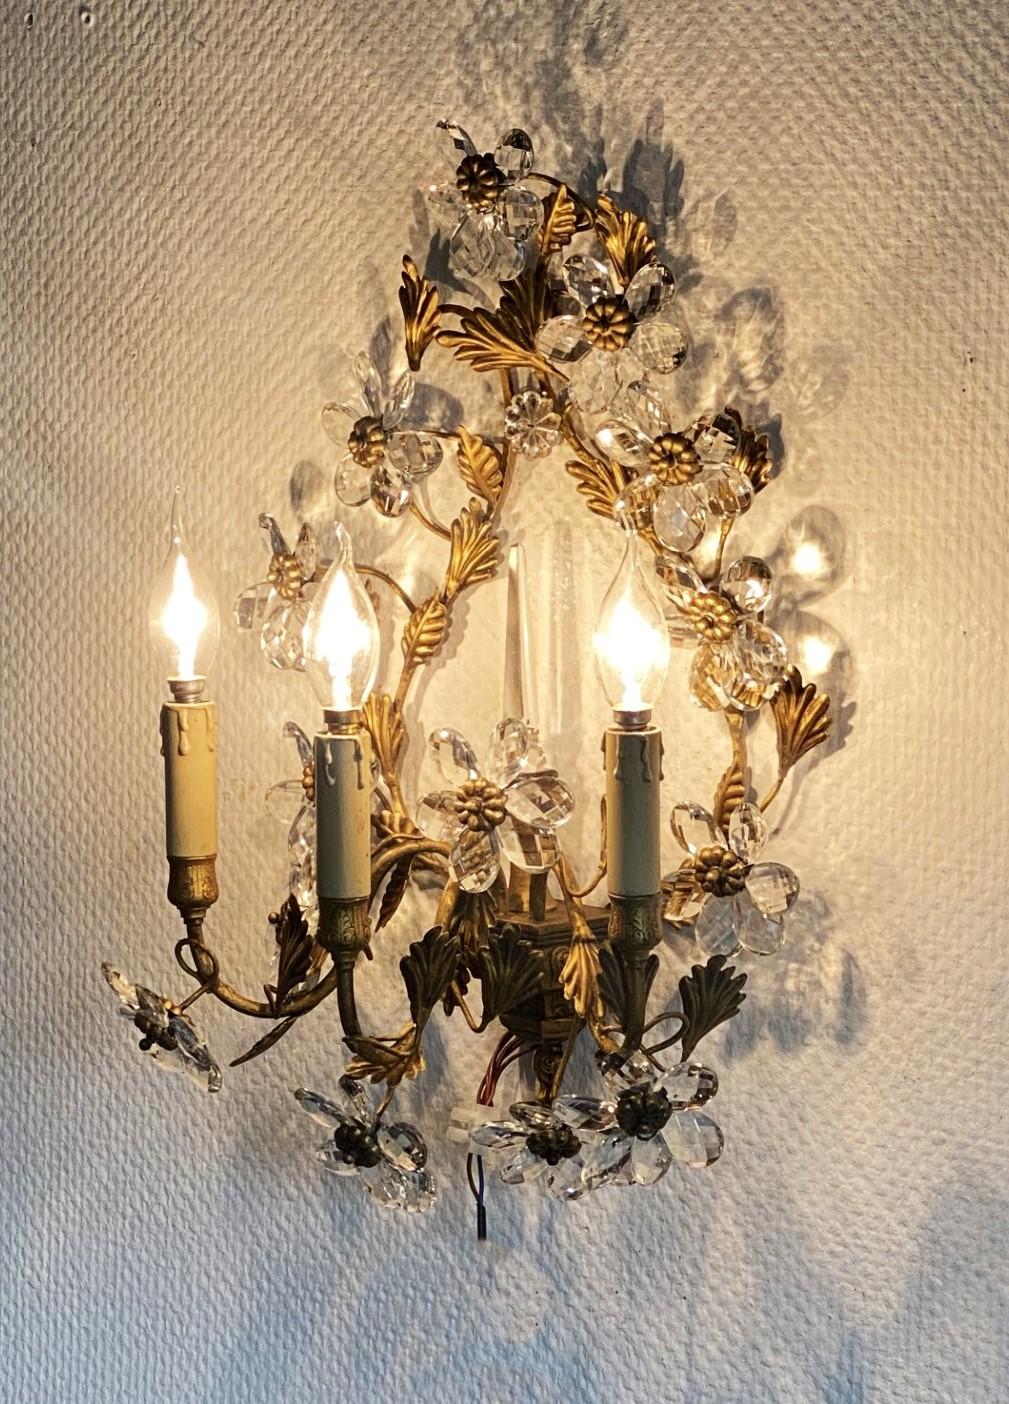 Pair of Large Maison Baguès Wrought Iron Crystal Flower Wall Sconces, 1930s For Sale 4